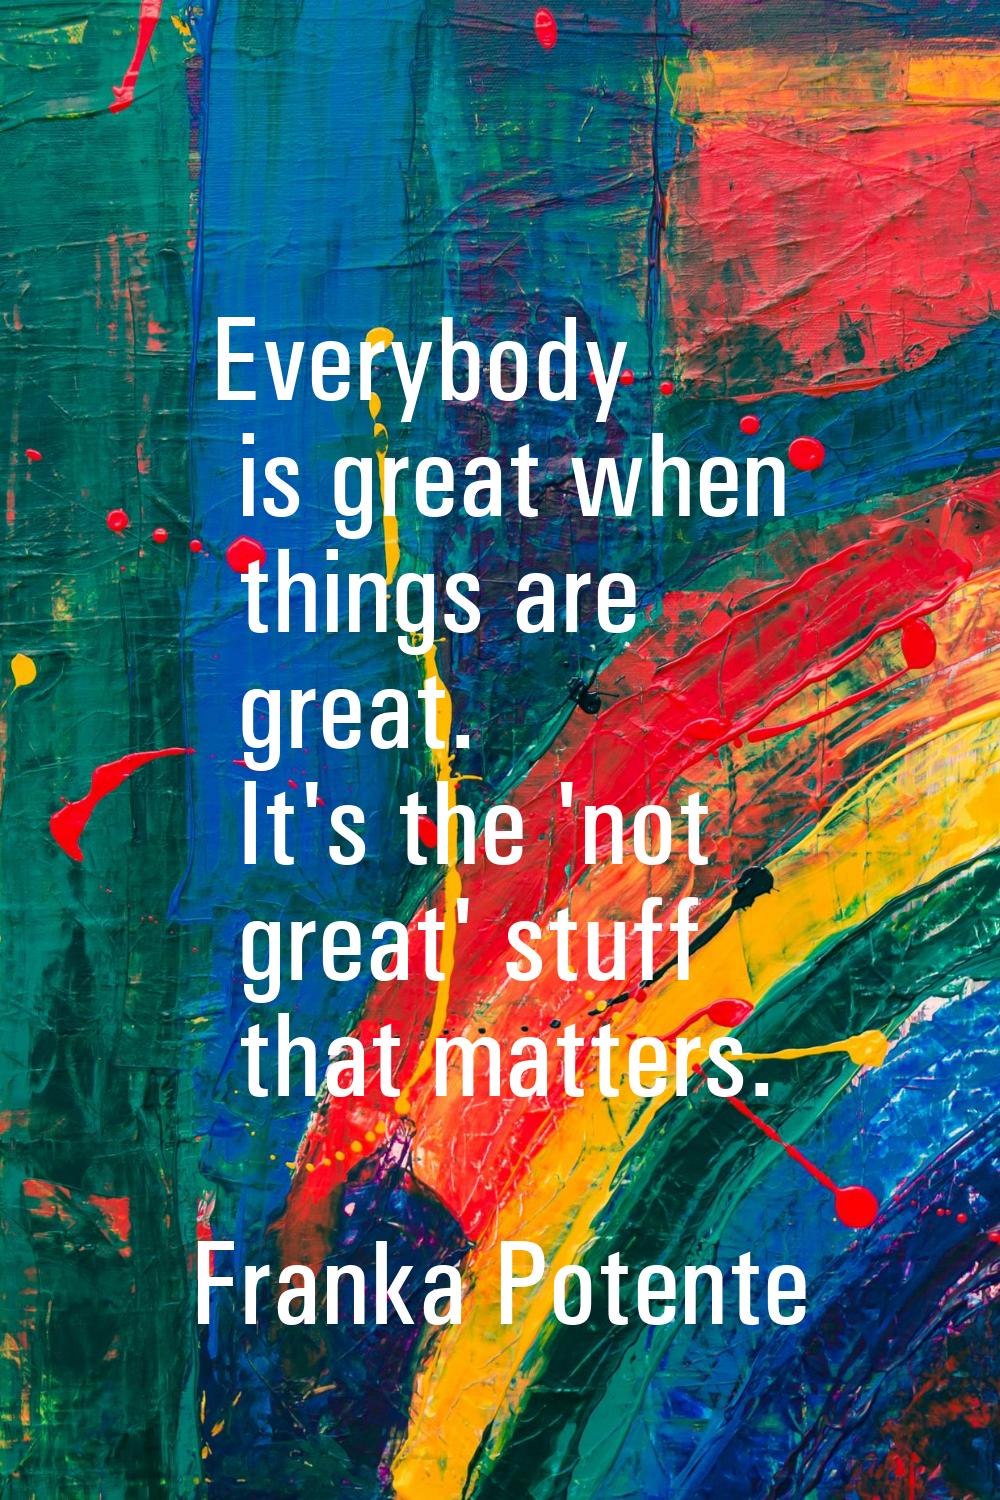 Everybody is great when things are great. It's the 'not great' stuff that matters.